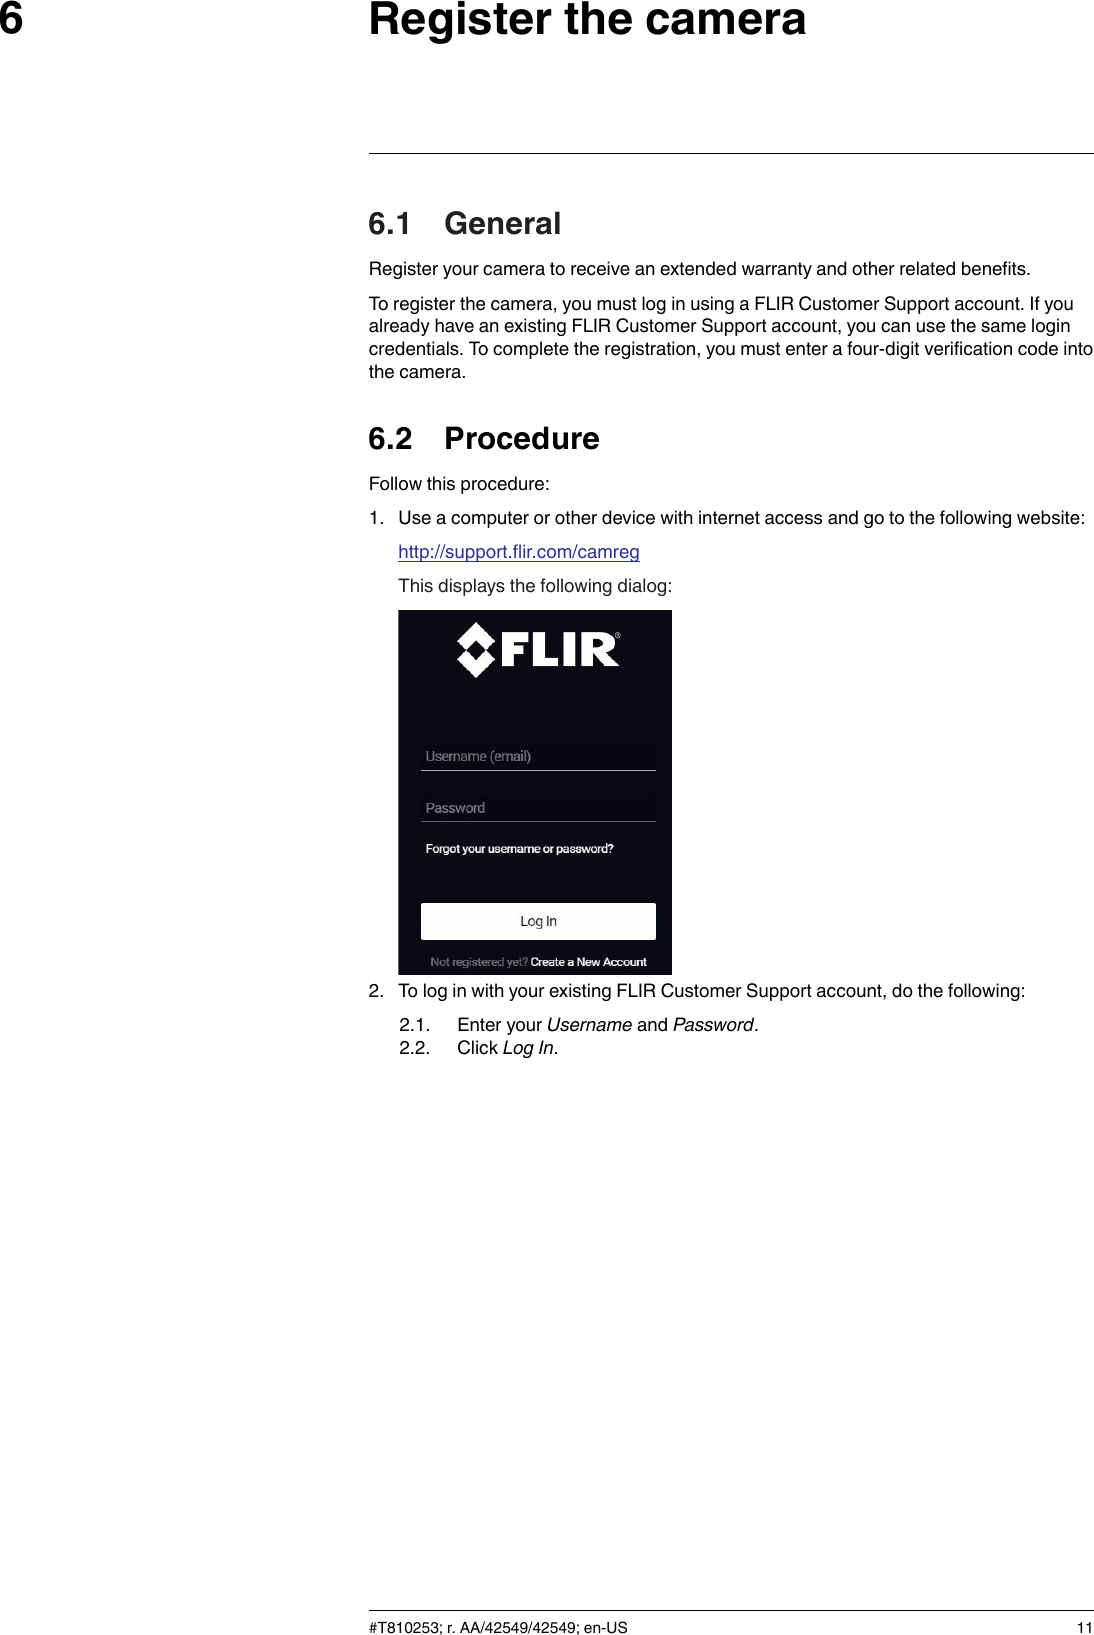 Register the camera66.1 GeneralRegister your camera to receive an extended warranty and other related benefits.To register the camera, you must log in using a FLIR Customer Support account. If youalready have an existing FLIR Customer Support account, you can use the same logincredentials. To complete the registration, you must enter a four-digit verification code intothe camera.6.2 ProcedureFollow this procedure:1. Use a computer or other device with internet access and go to the following website:http://support.flir.com/camregThis displays the following dialog:2. To log in with your existing FLIR Customer Support account, do the following:2.1. Enter your Username and Password.2.2. Click Log In.#T810253; r. AA/42549/42549; en-US 11